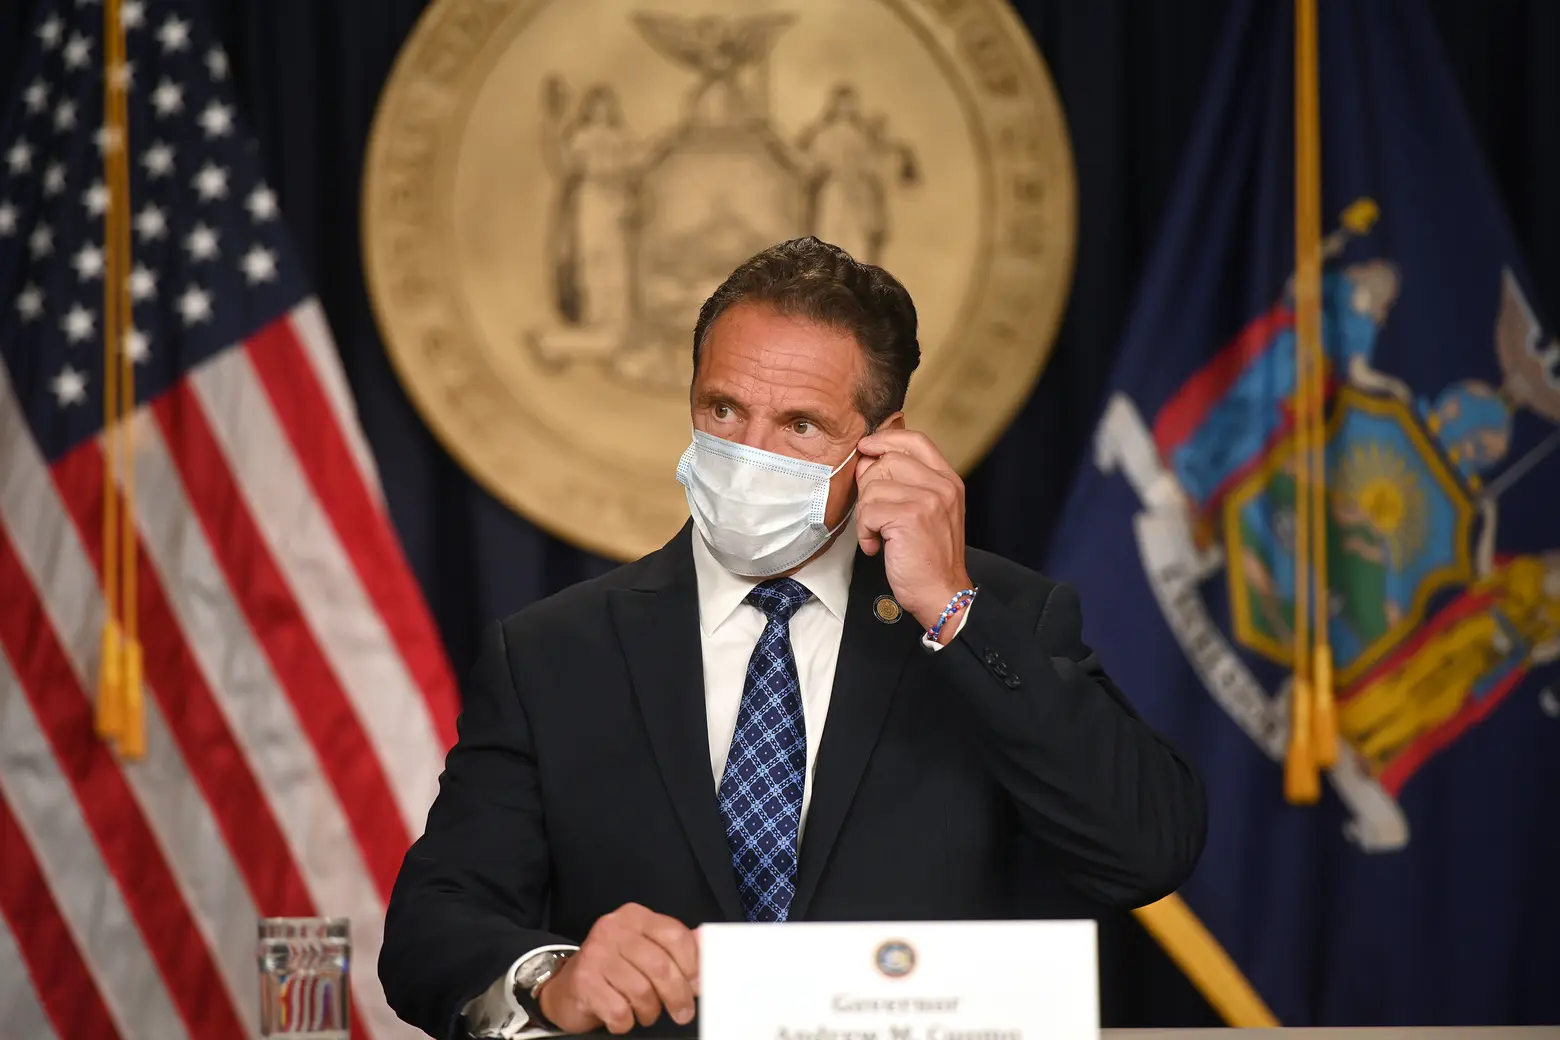 New York will lift mask mandate in line with CDC guidelines